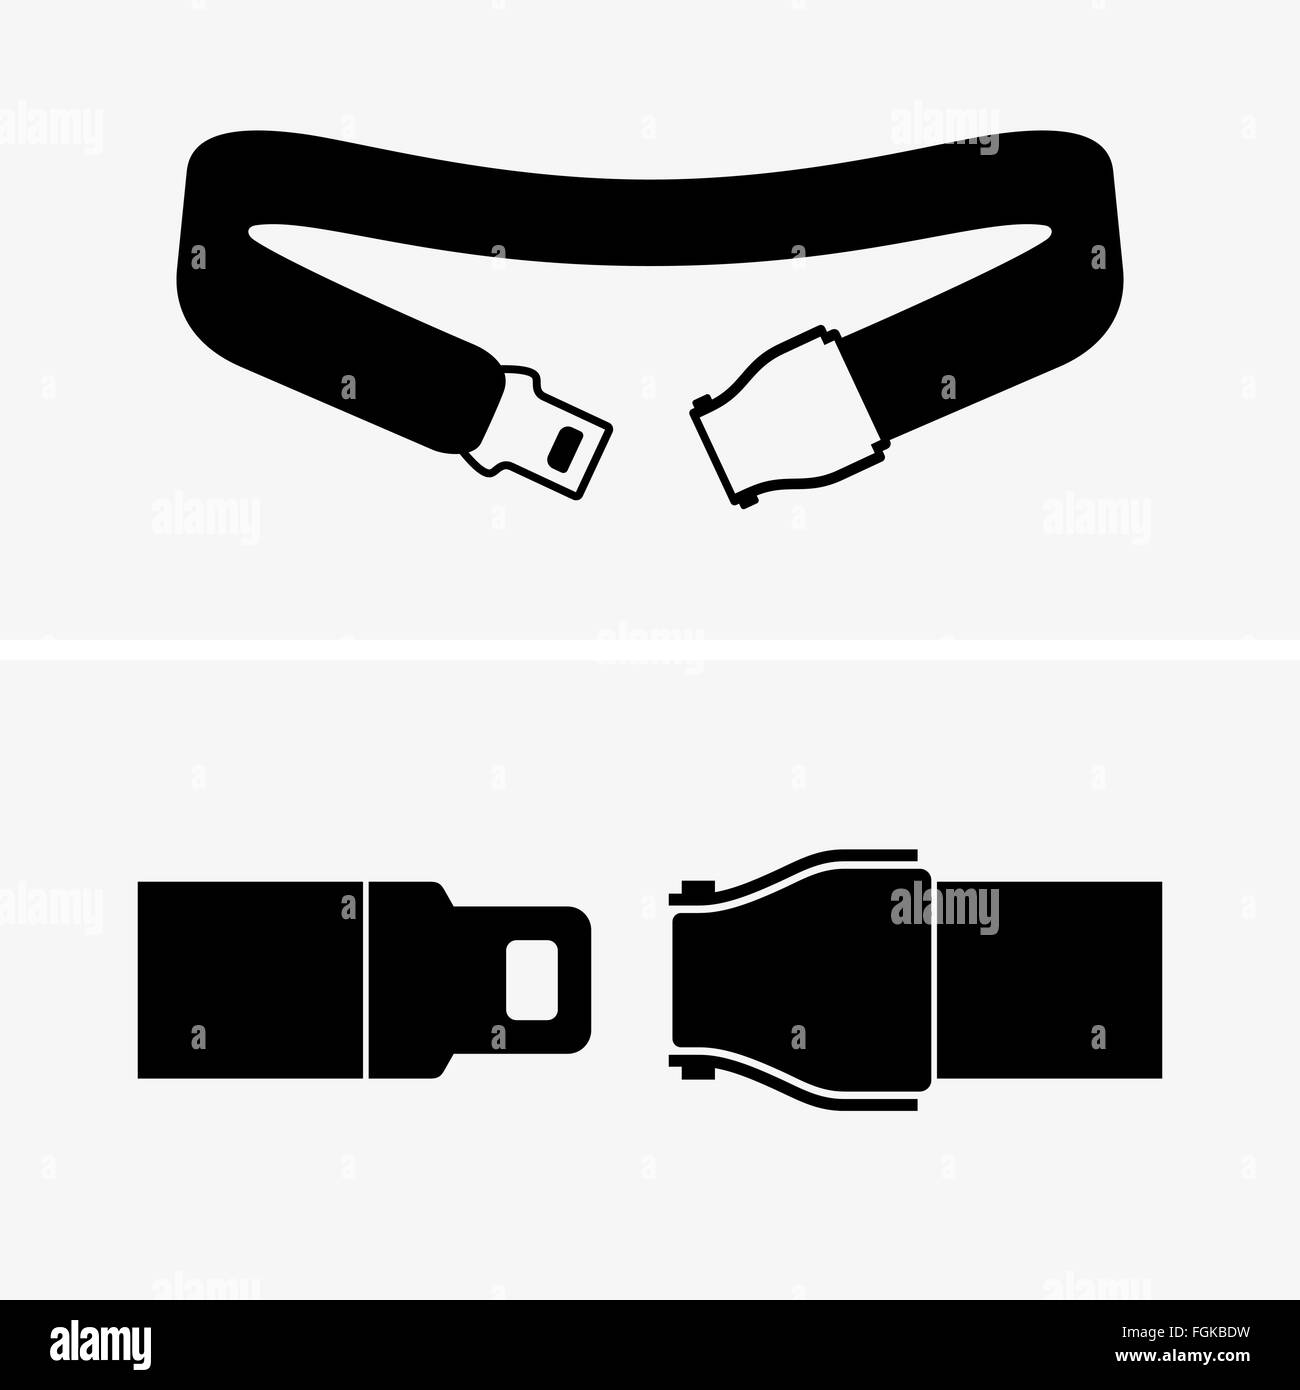 Safety belts Black and White Stock Photos & Images - Alamy